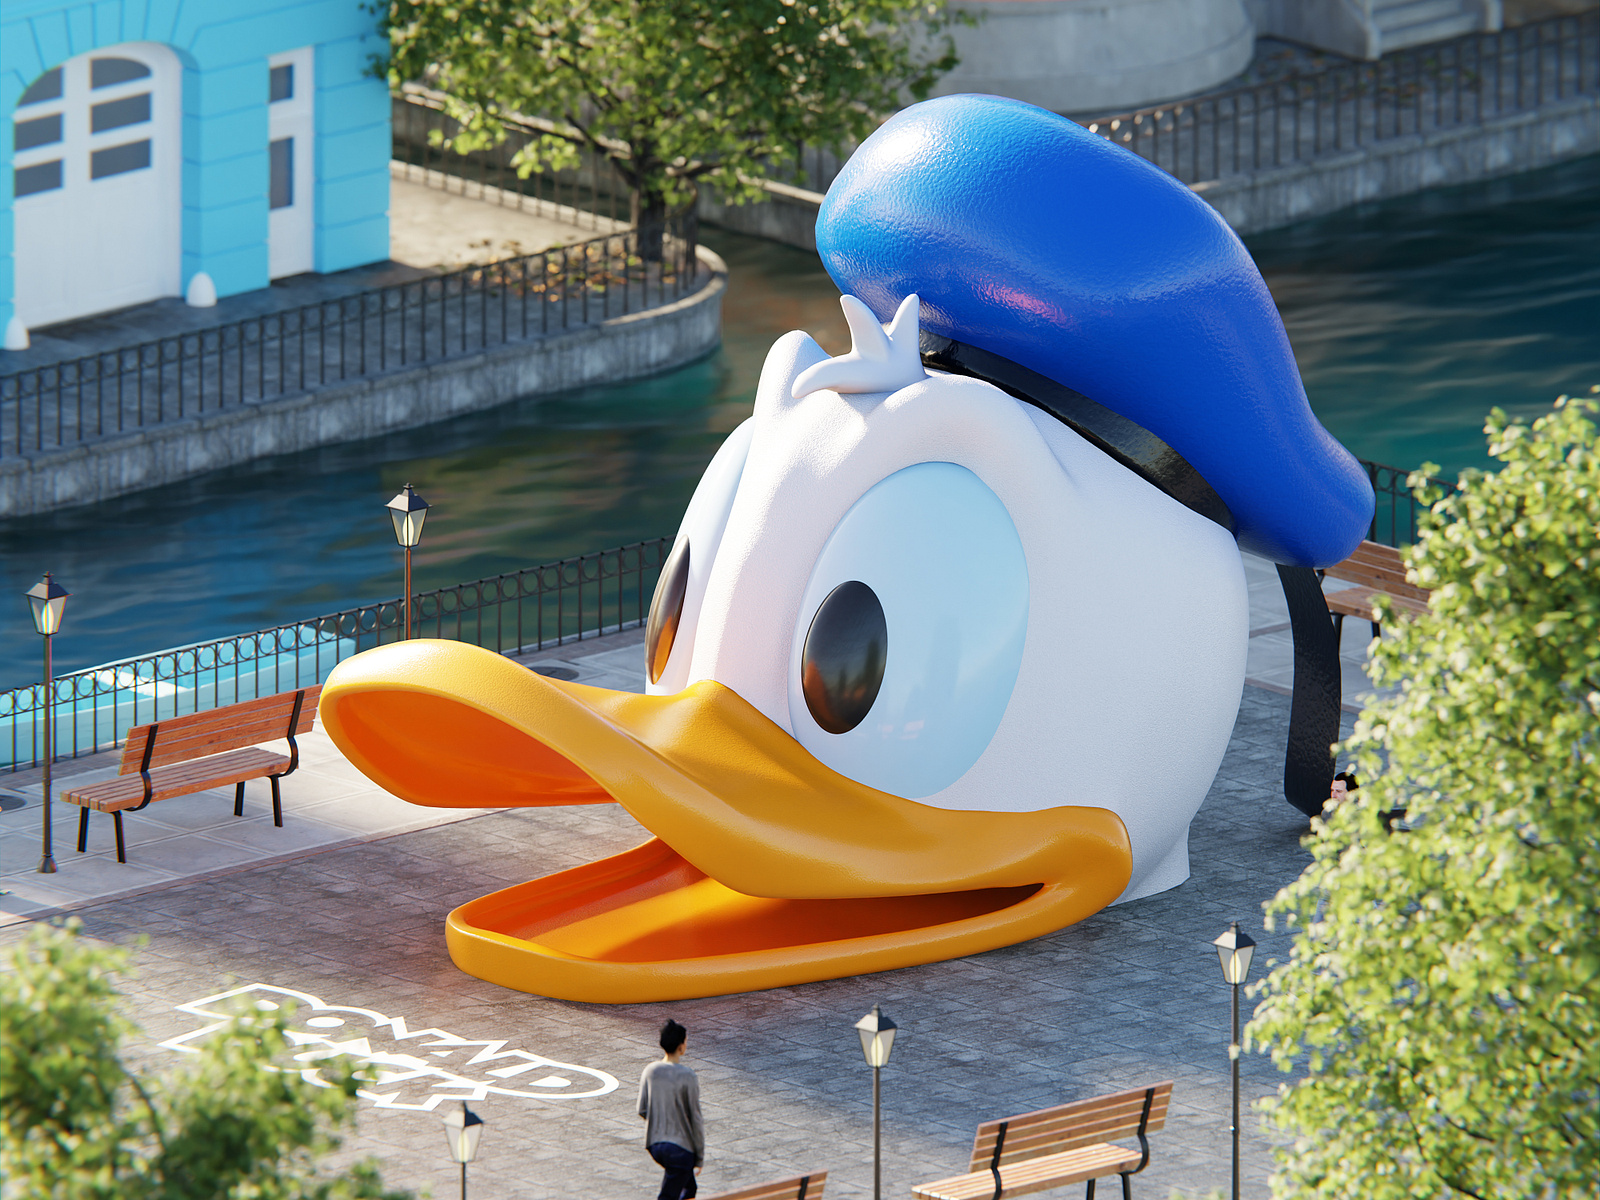 Donald duck Store by Eslam Mhd on Dribbble